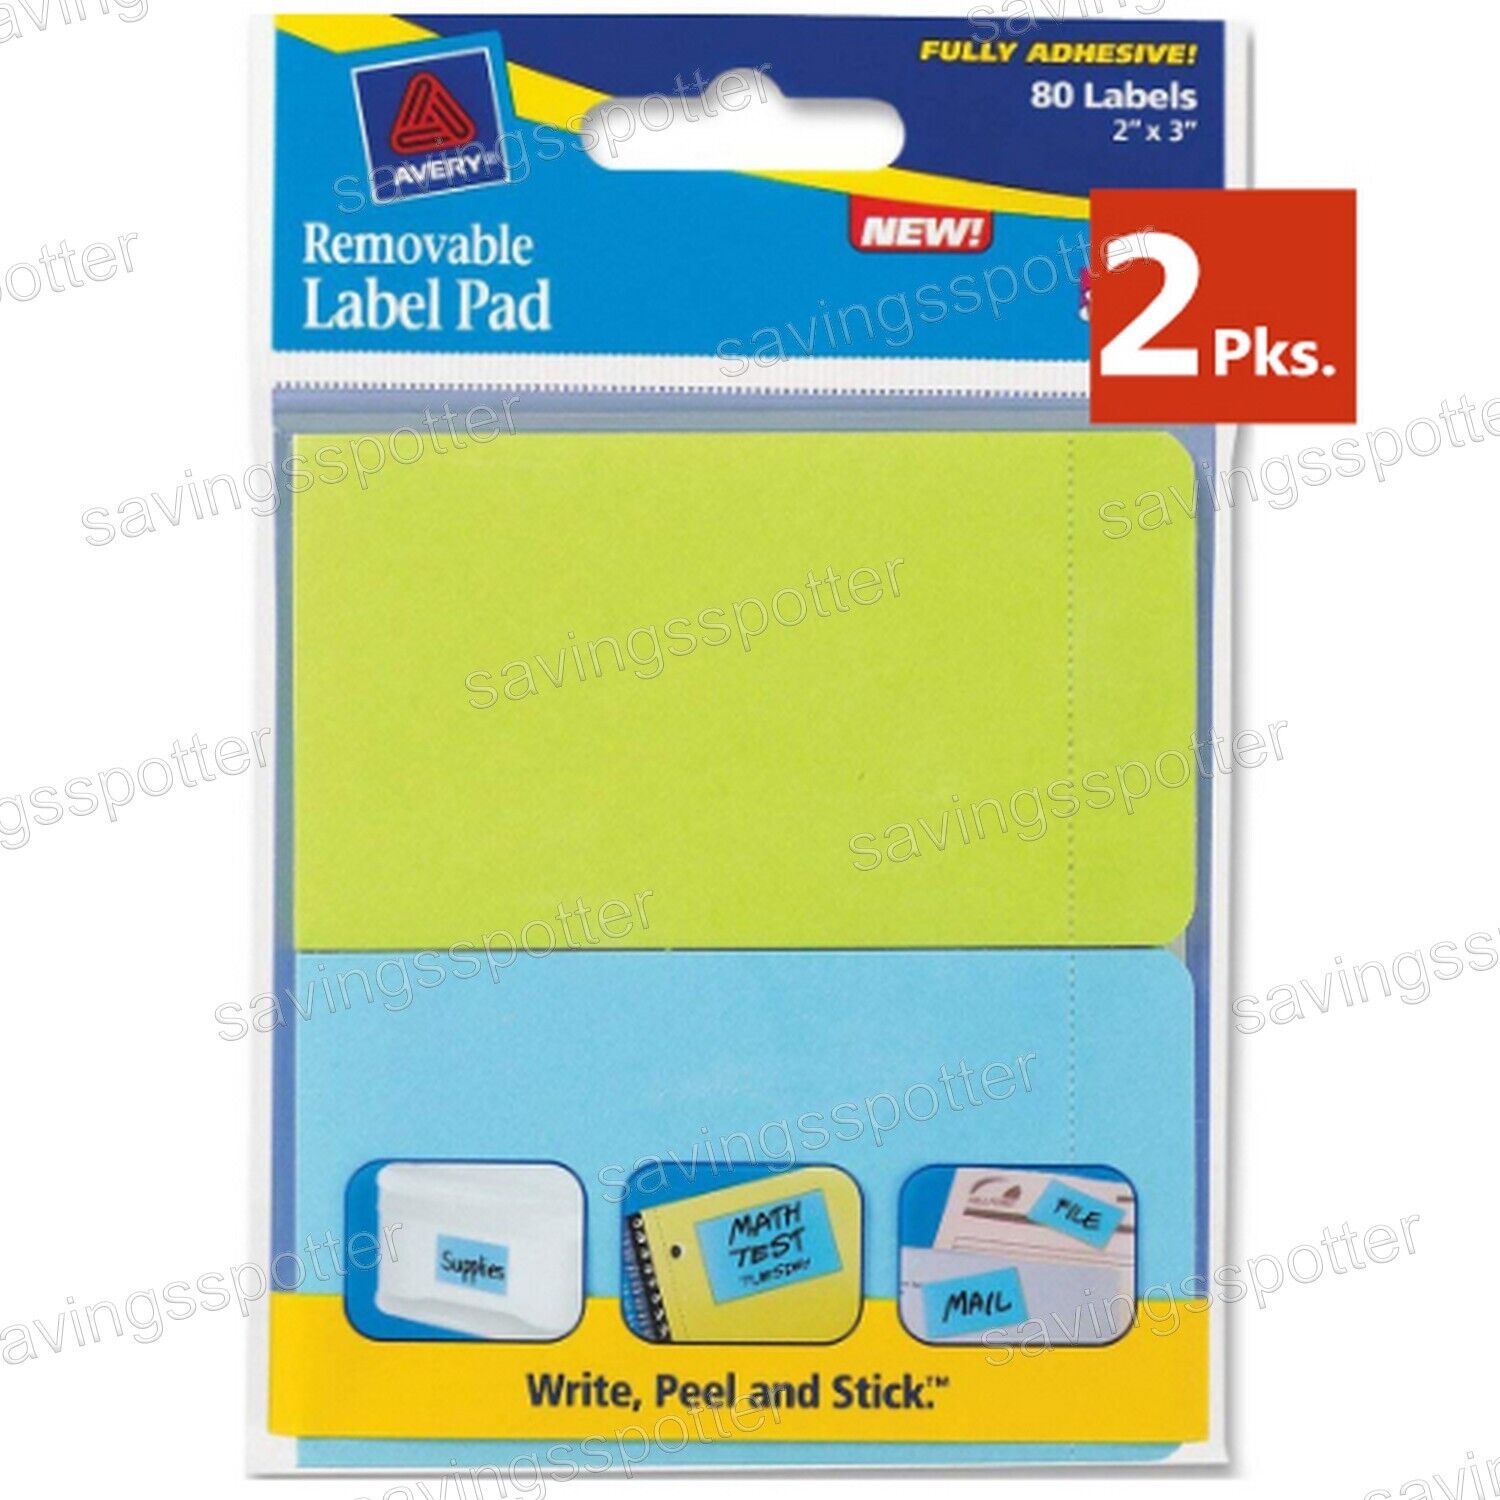 2 Packs Avery 22017 Removable Label Pad 2" x 3" Lime Green Blue 80/Pack Avery Dennison AVE22017, 22017